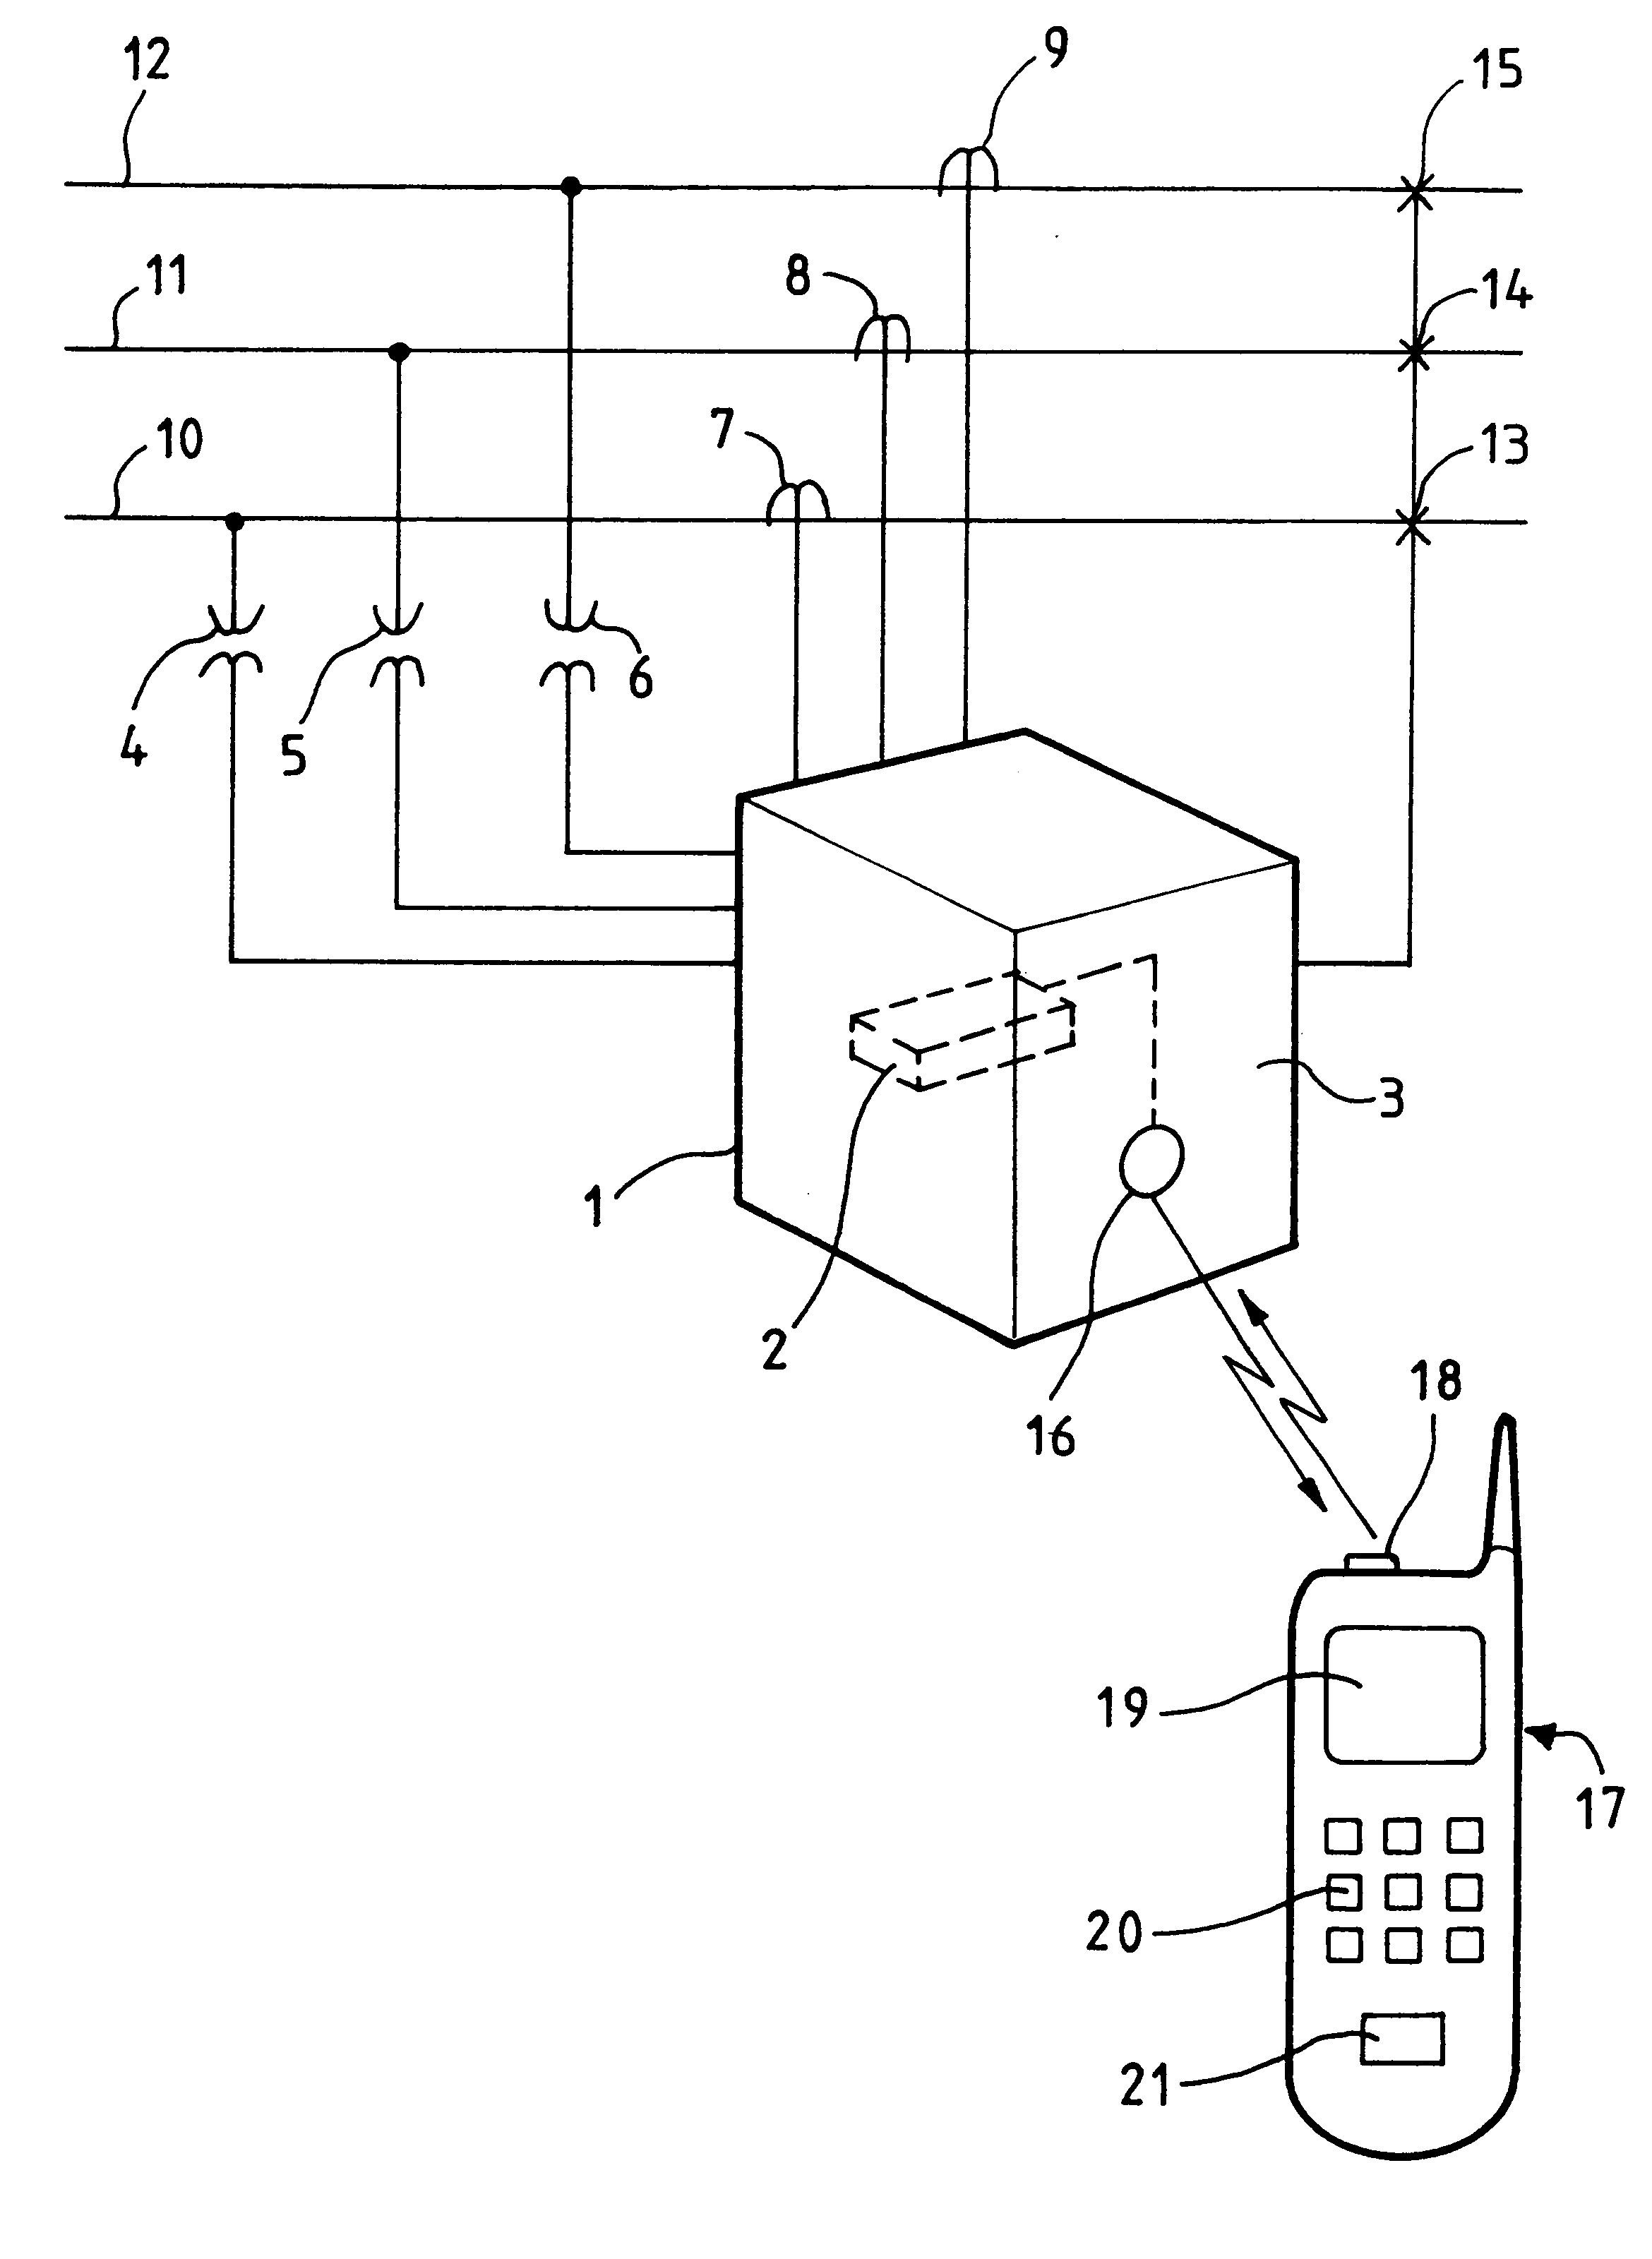 Protection system for an electricity network having an infrared data transmission link using the WAP protocol